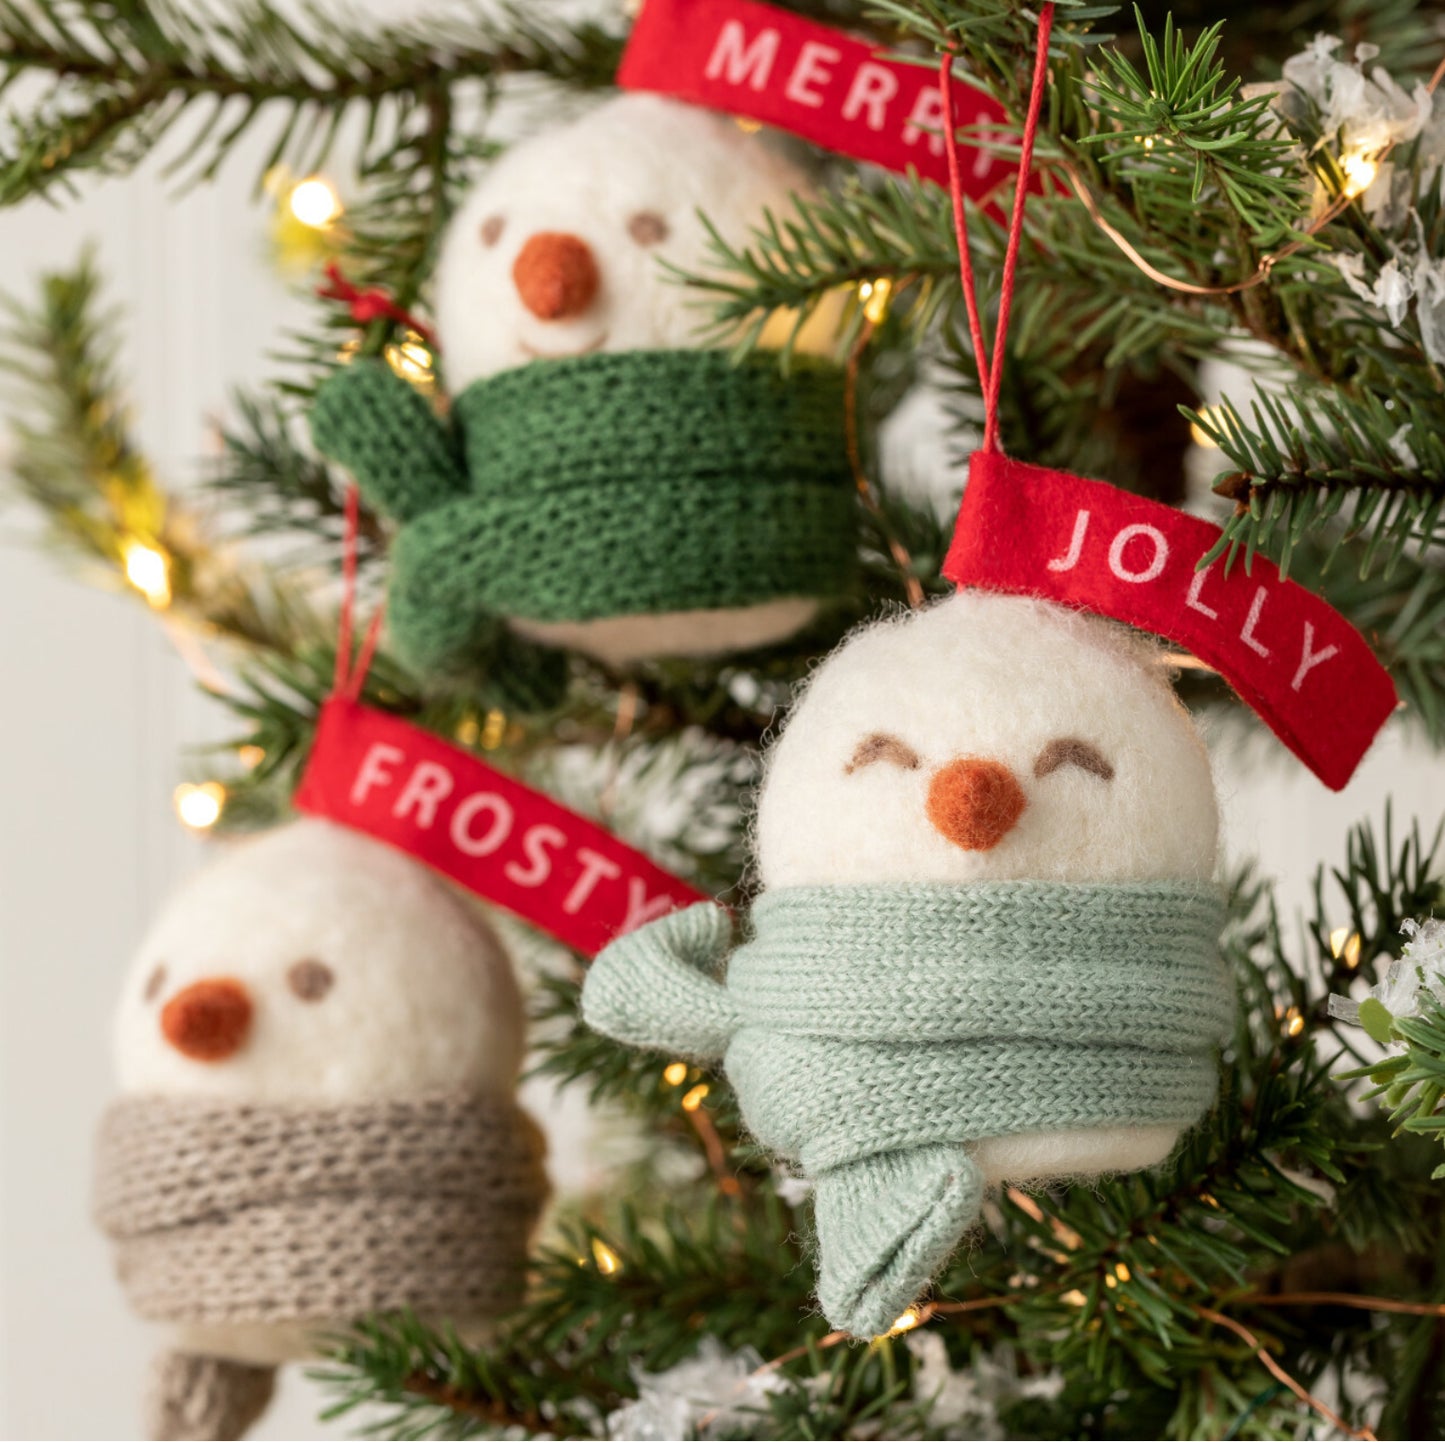 Frosty Merry Jolly Snowman Ornaments | 3 Assorted